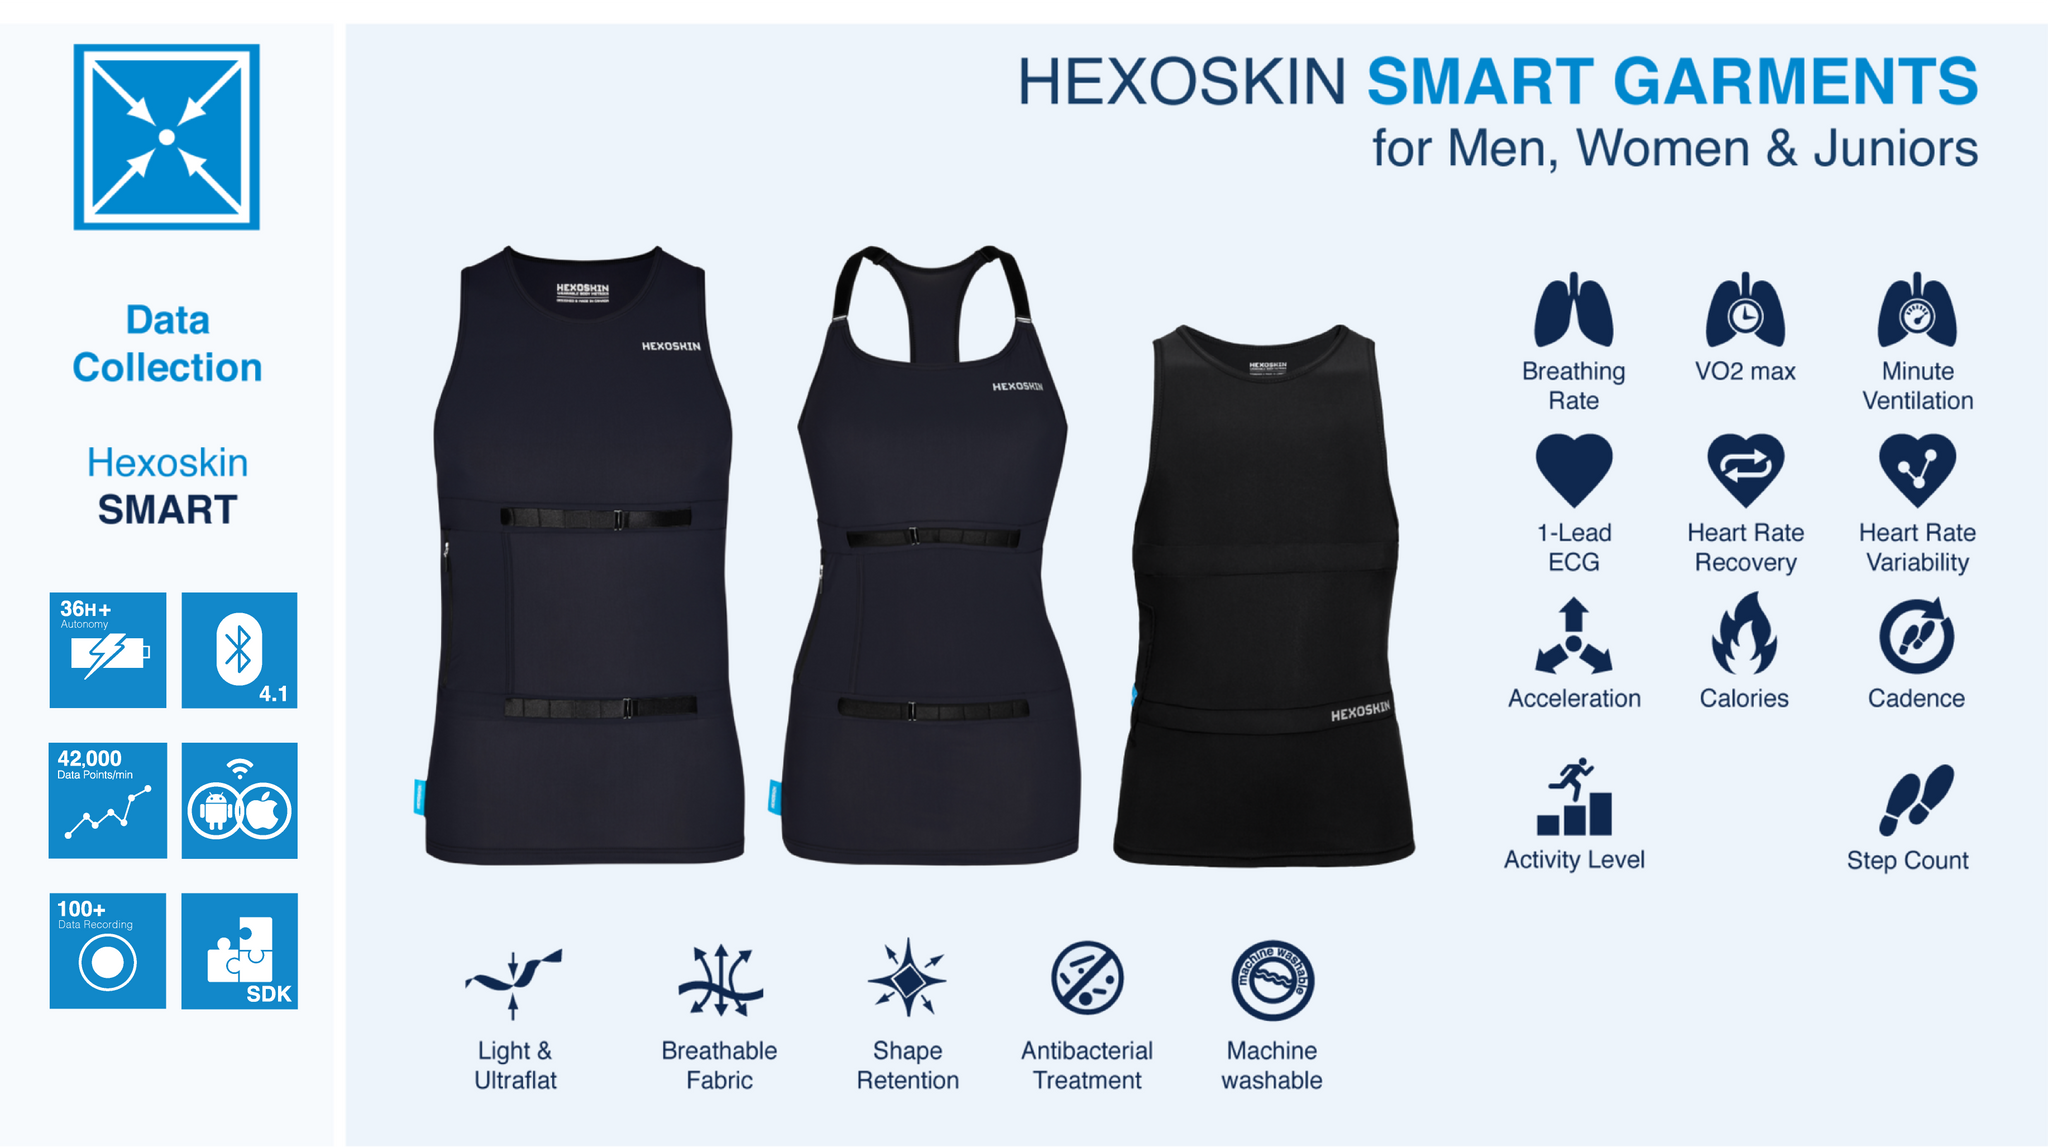 Hexoskin - Real-Time ECG - EKG - Electrocardiograph - Heartbeat Monitor - Plethysmography - Titad Volume - Breathing Rate - Activity and Sleep Tracker